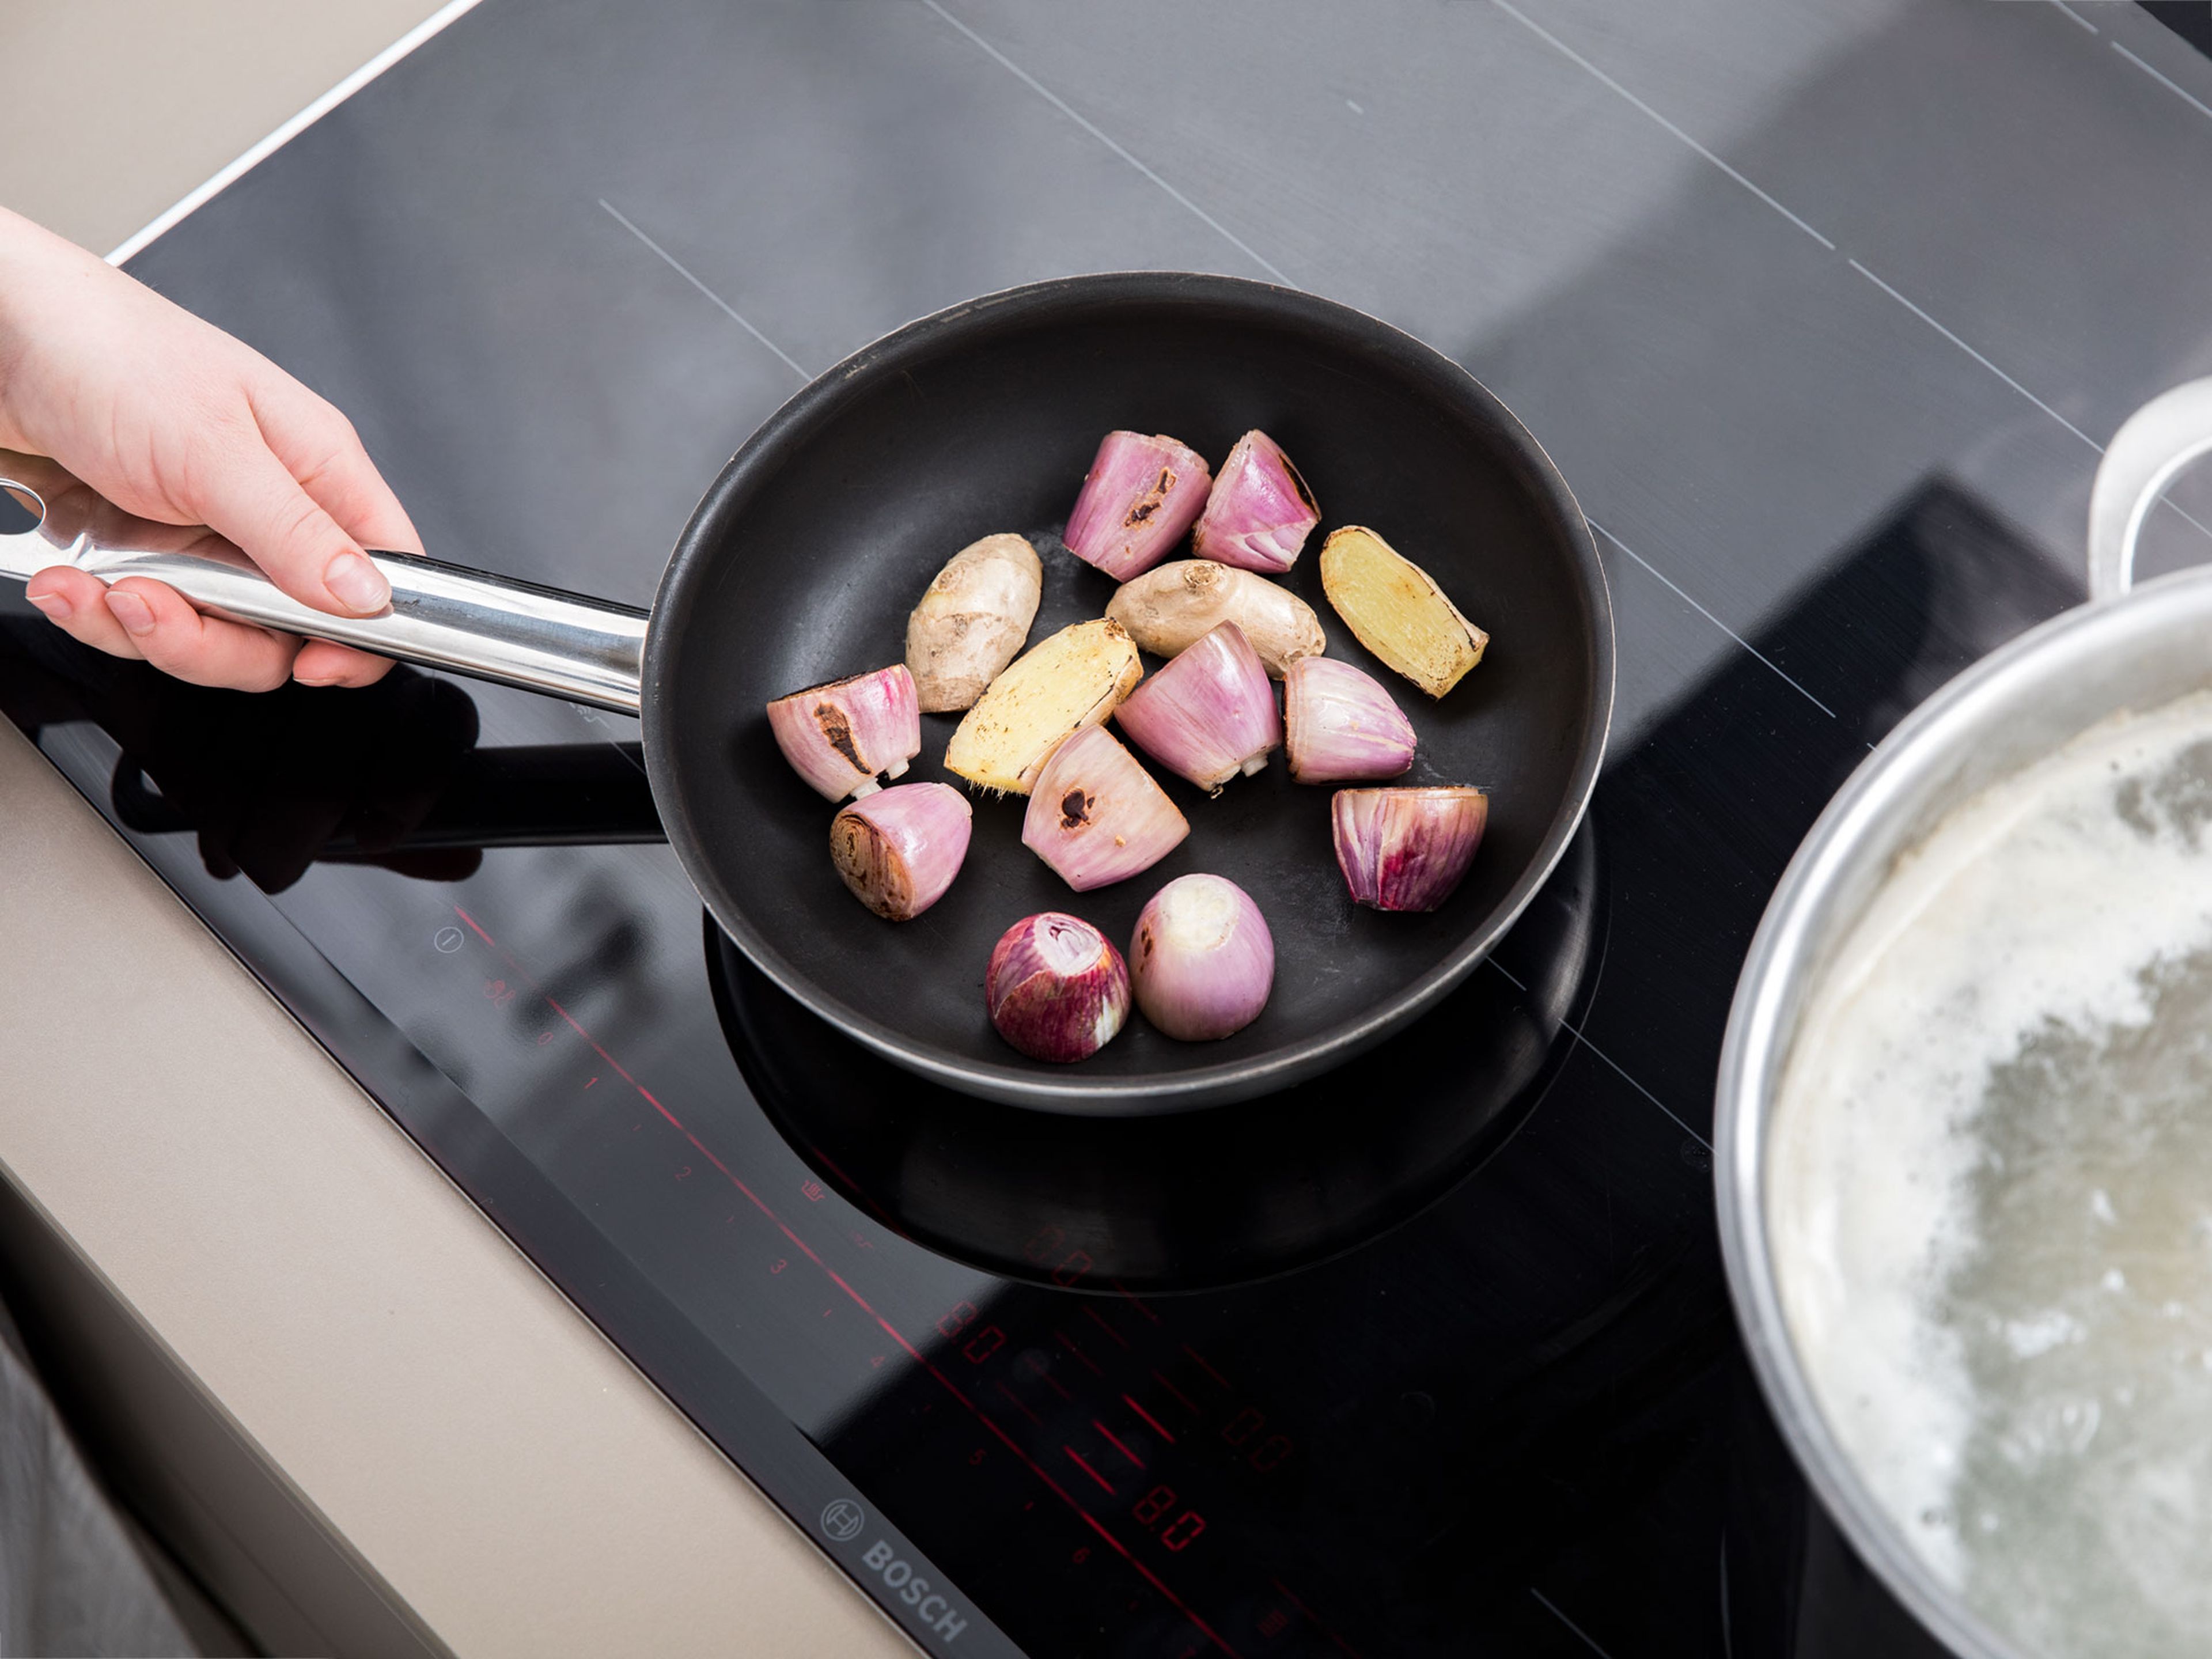 Peel shallots and add to a frying pan with ginger. Fry until they start to turn very dark brown, then add to the pot. Let the broth simmer over medium-low heat for approx. 2 hrs. Discard beef bone, oxtail, ginger and shallots. Remove boiled beef and transfer to a bowl with cold water.